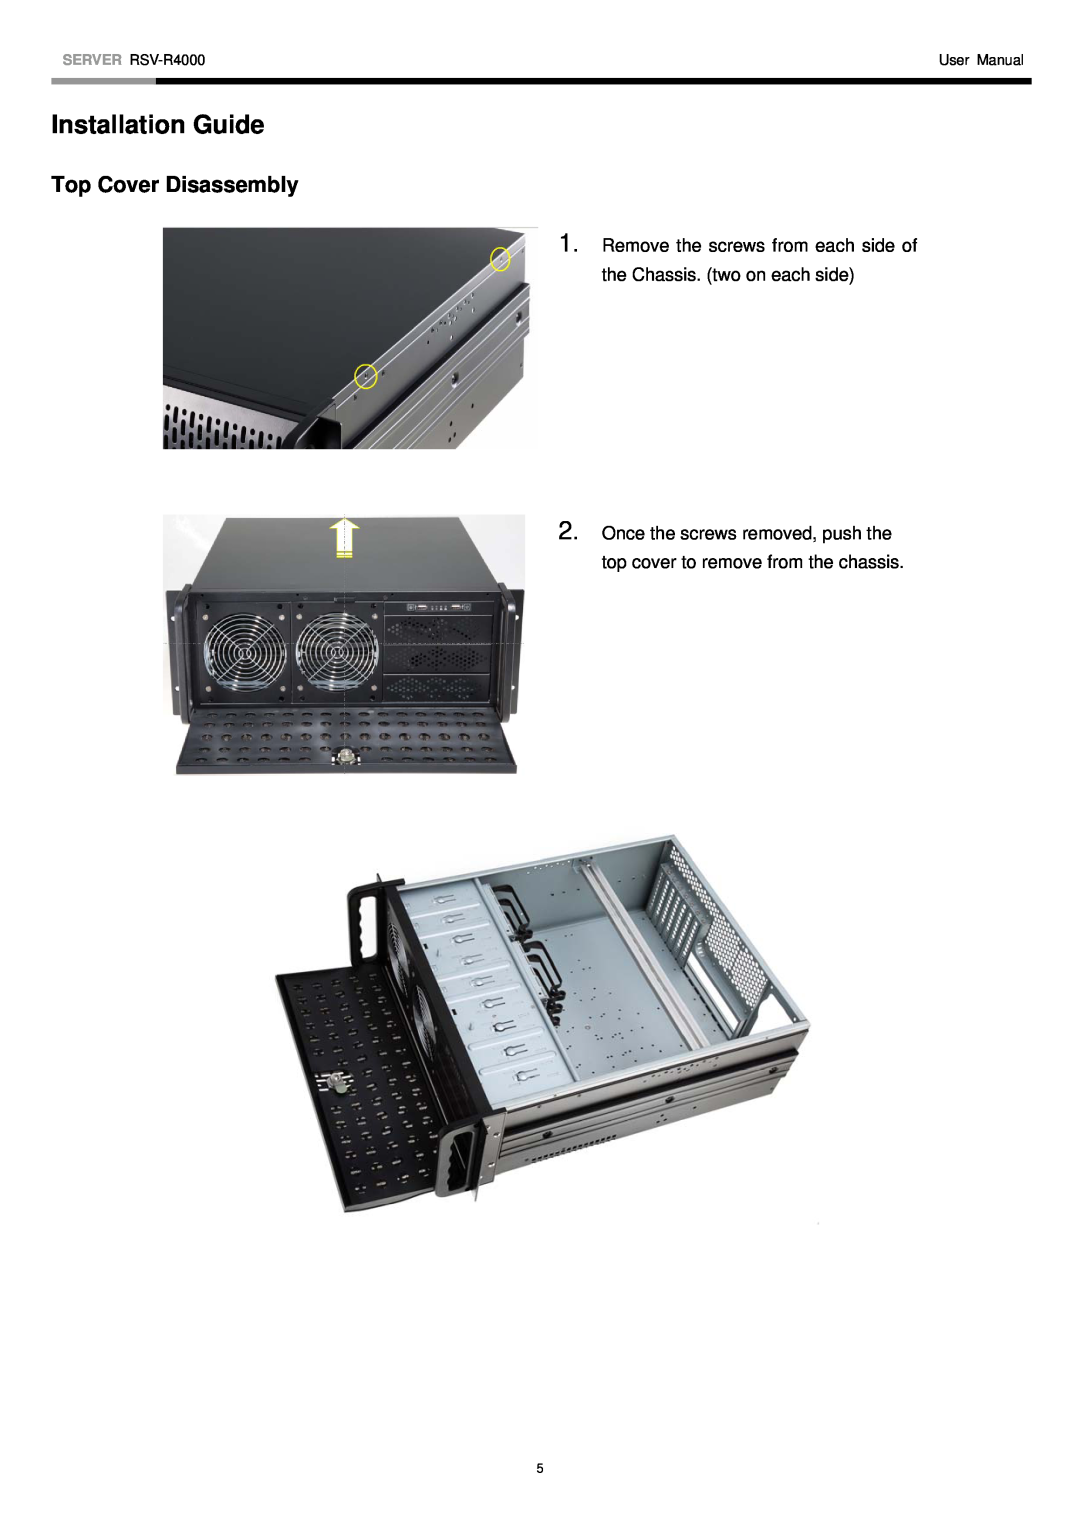 Rosewill user manual Installation Guide, Top Cover Disassembly, SERVER RSV-R4000, User Manual 